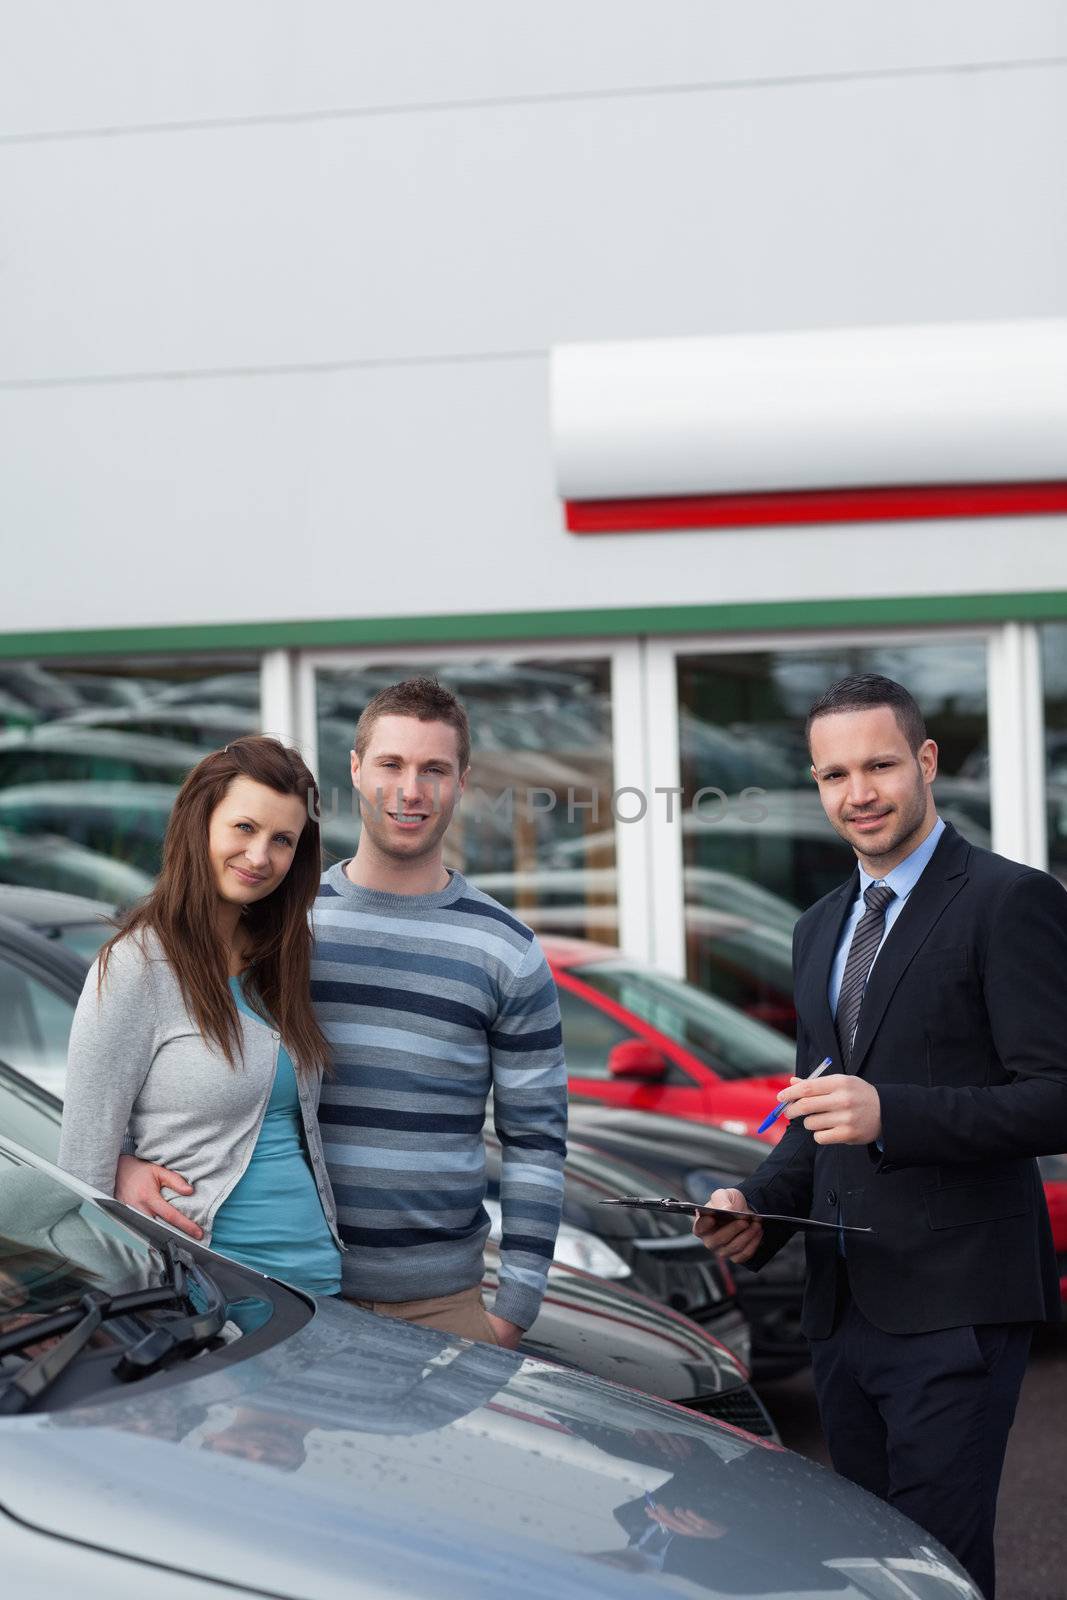 Clients buying a new car by Wavebreakmedia